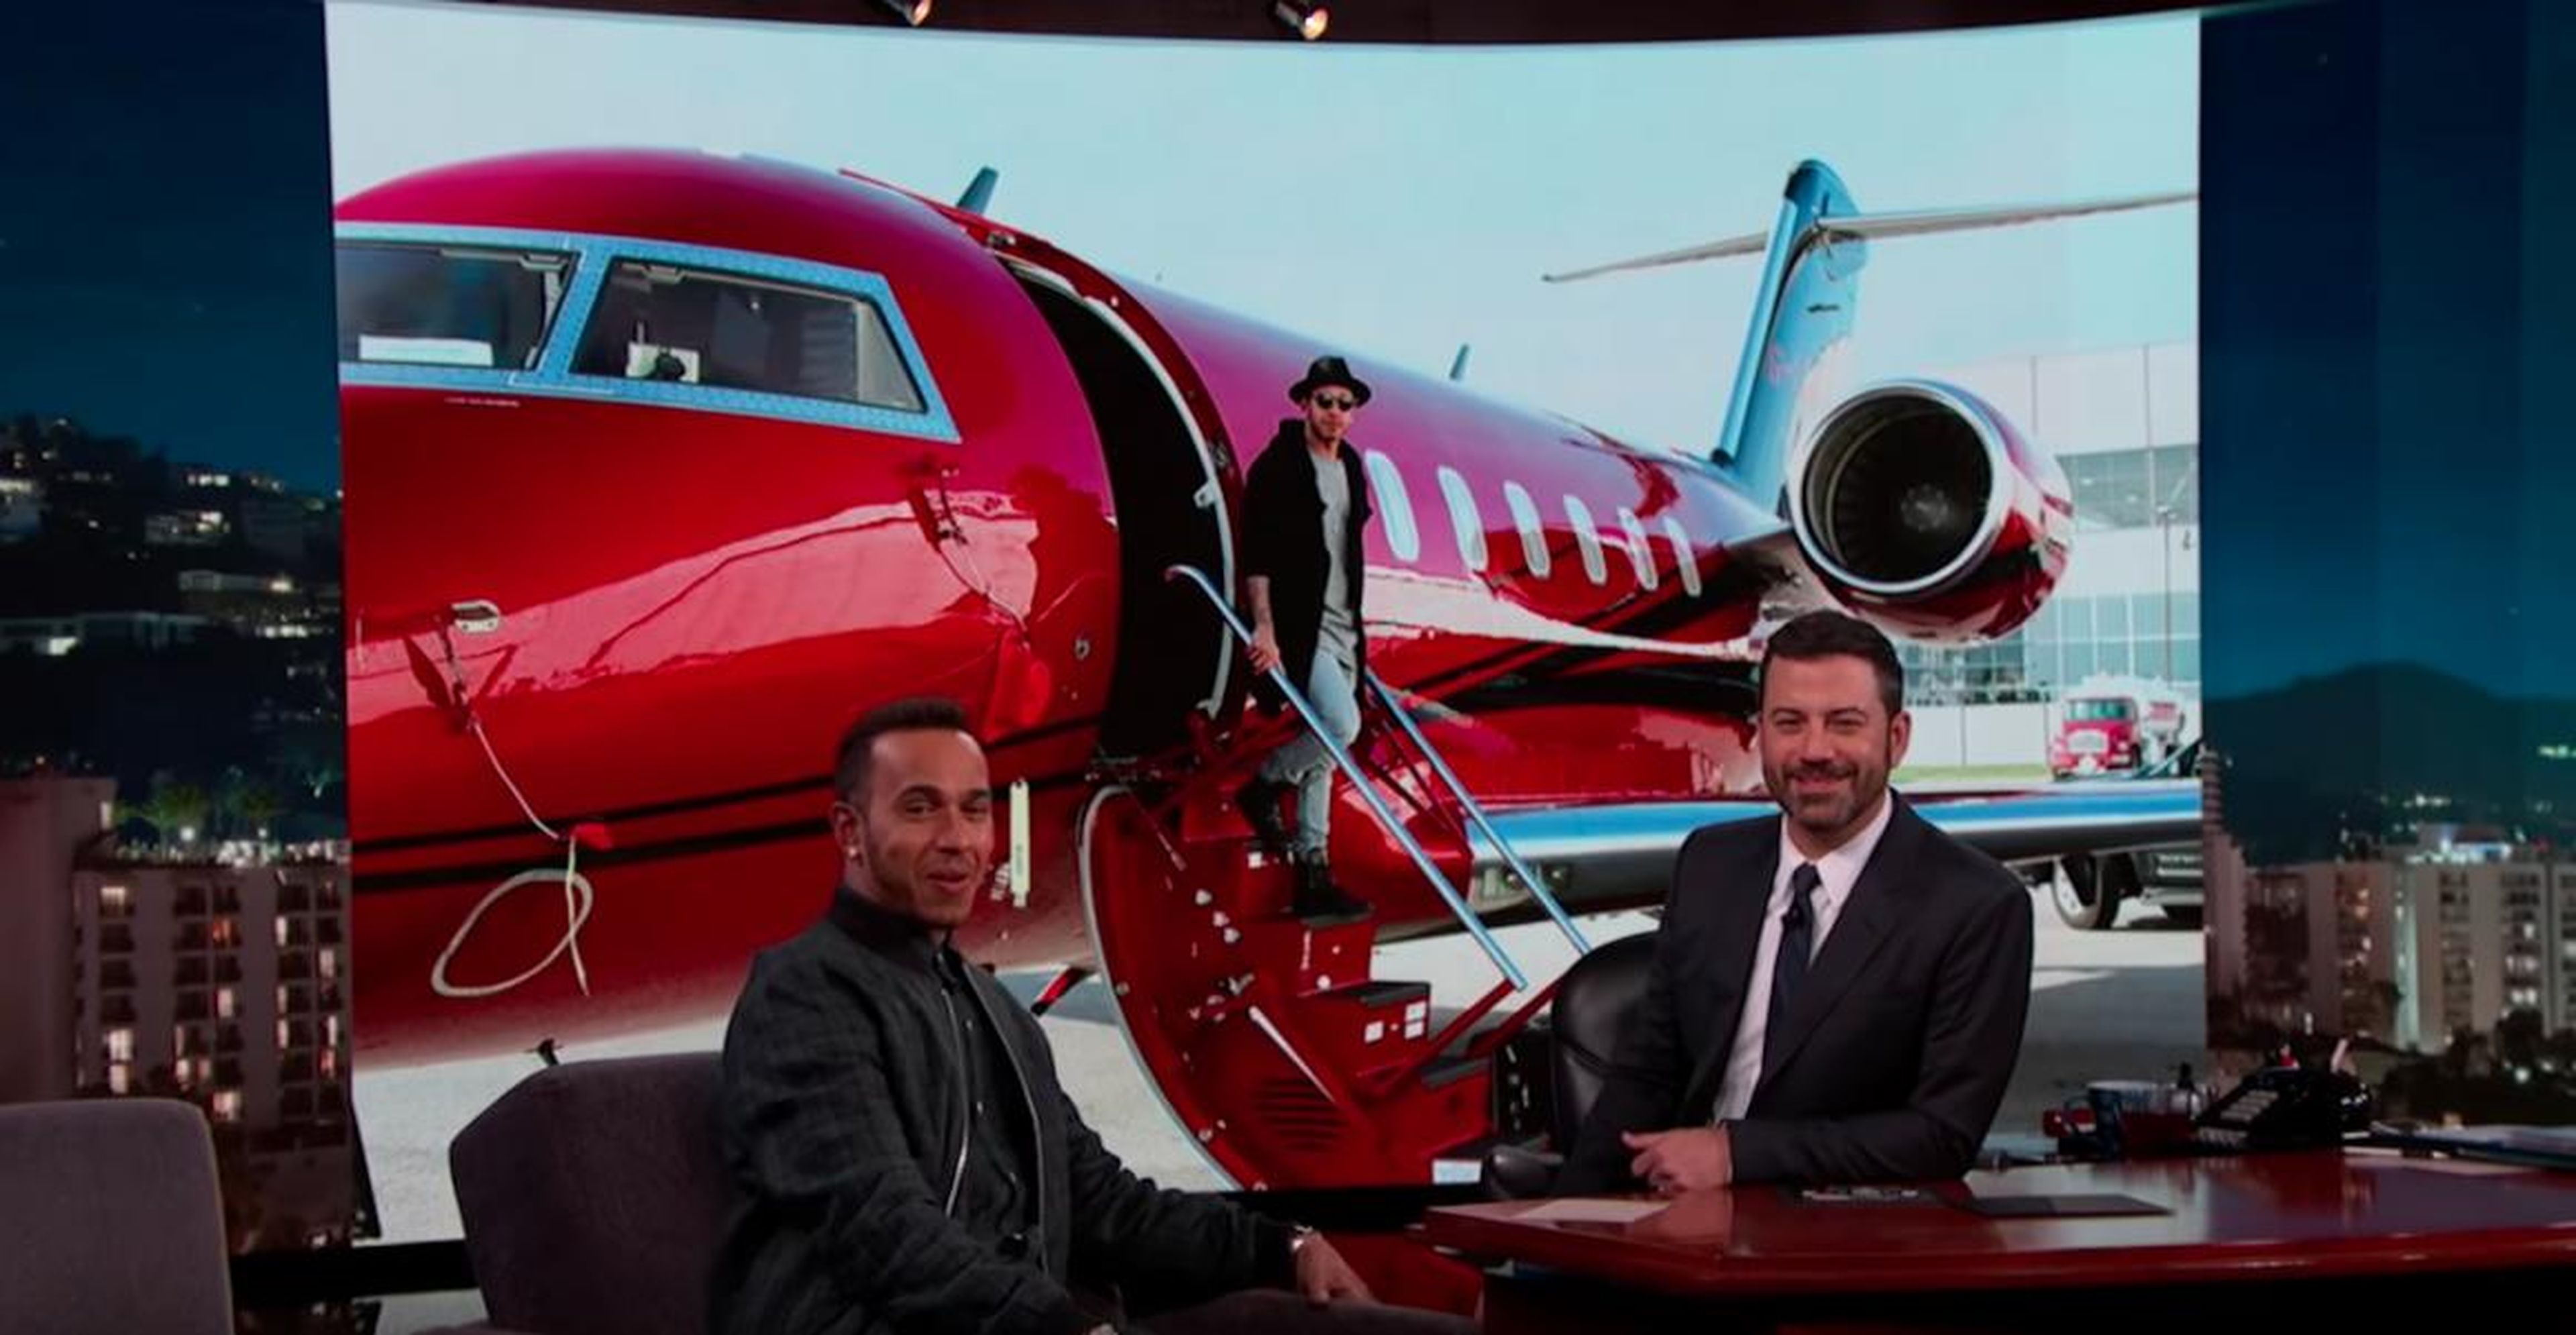 And what multi-millionaire champion would Hamilton be if he did not have his own Bombardier Challenger 605 private plane that he "pimped out" in red because white planes are just boring? He has one rule — take your shoes off after